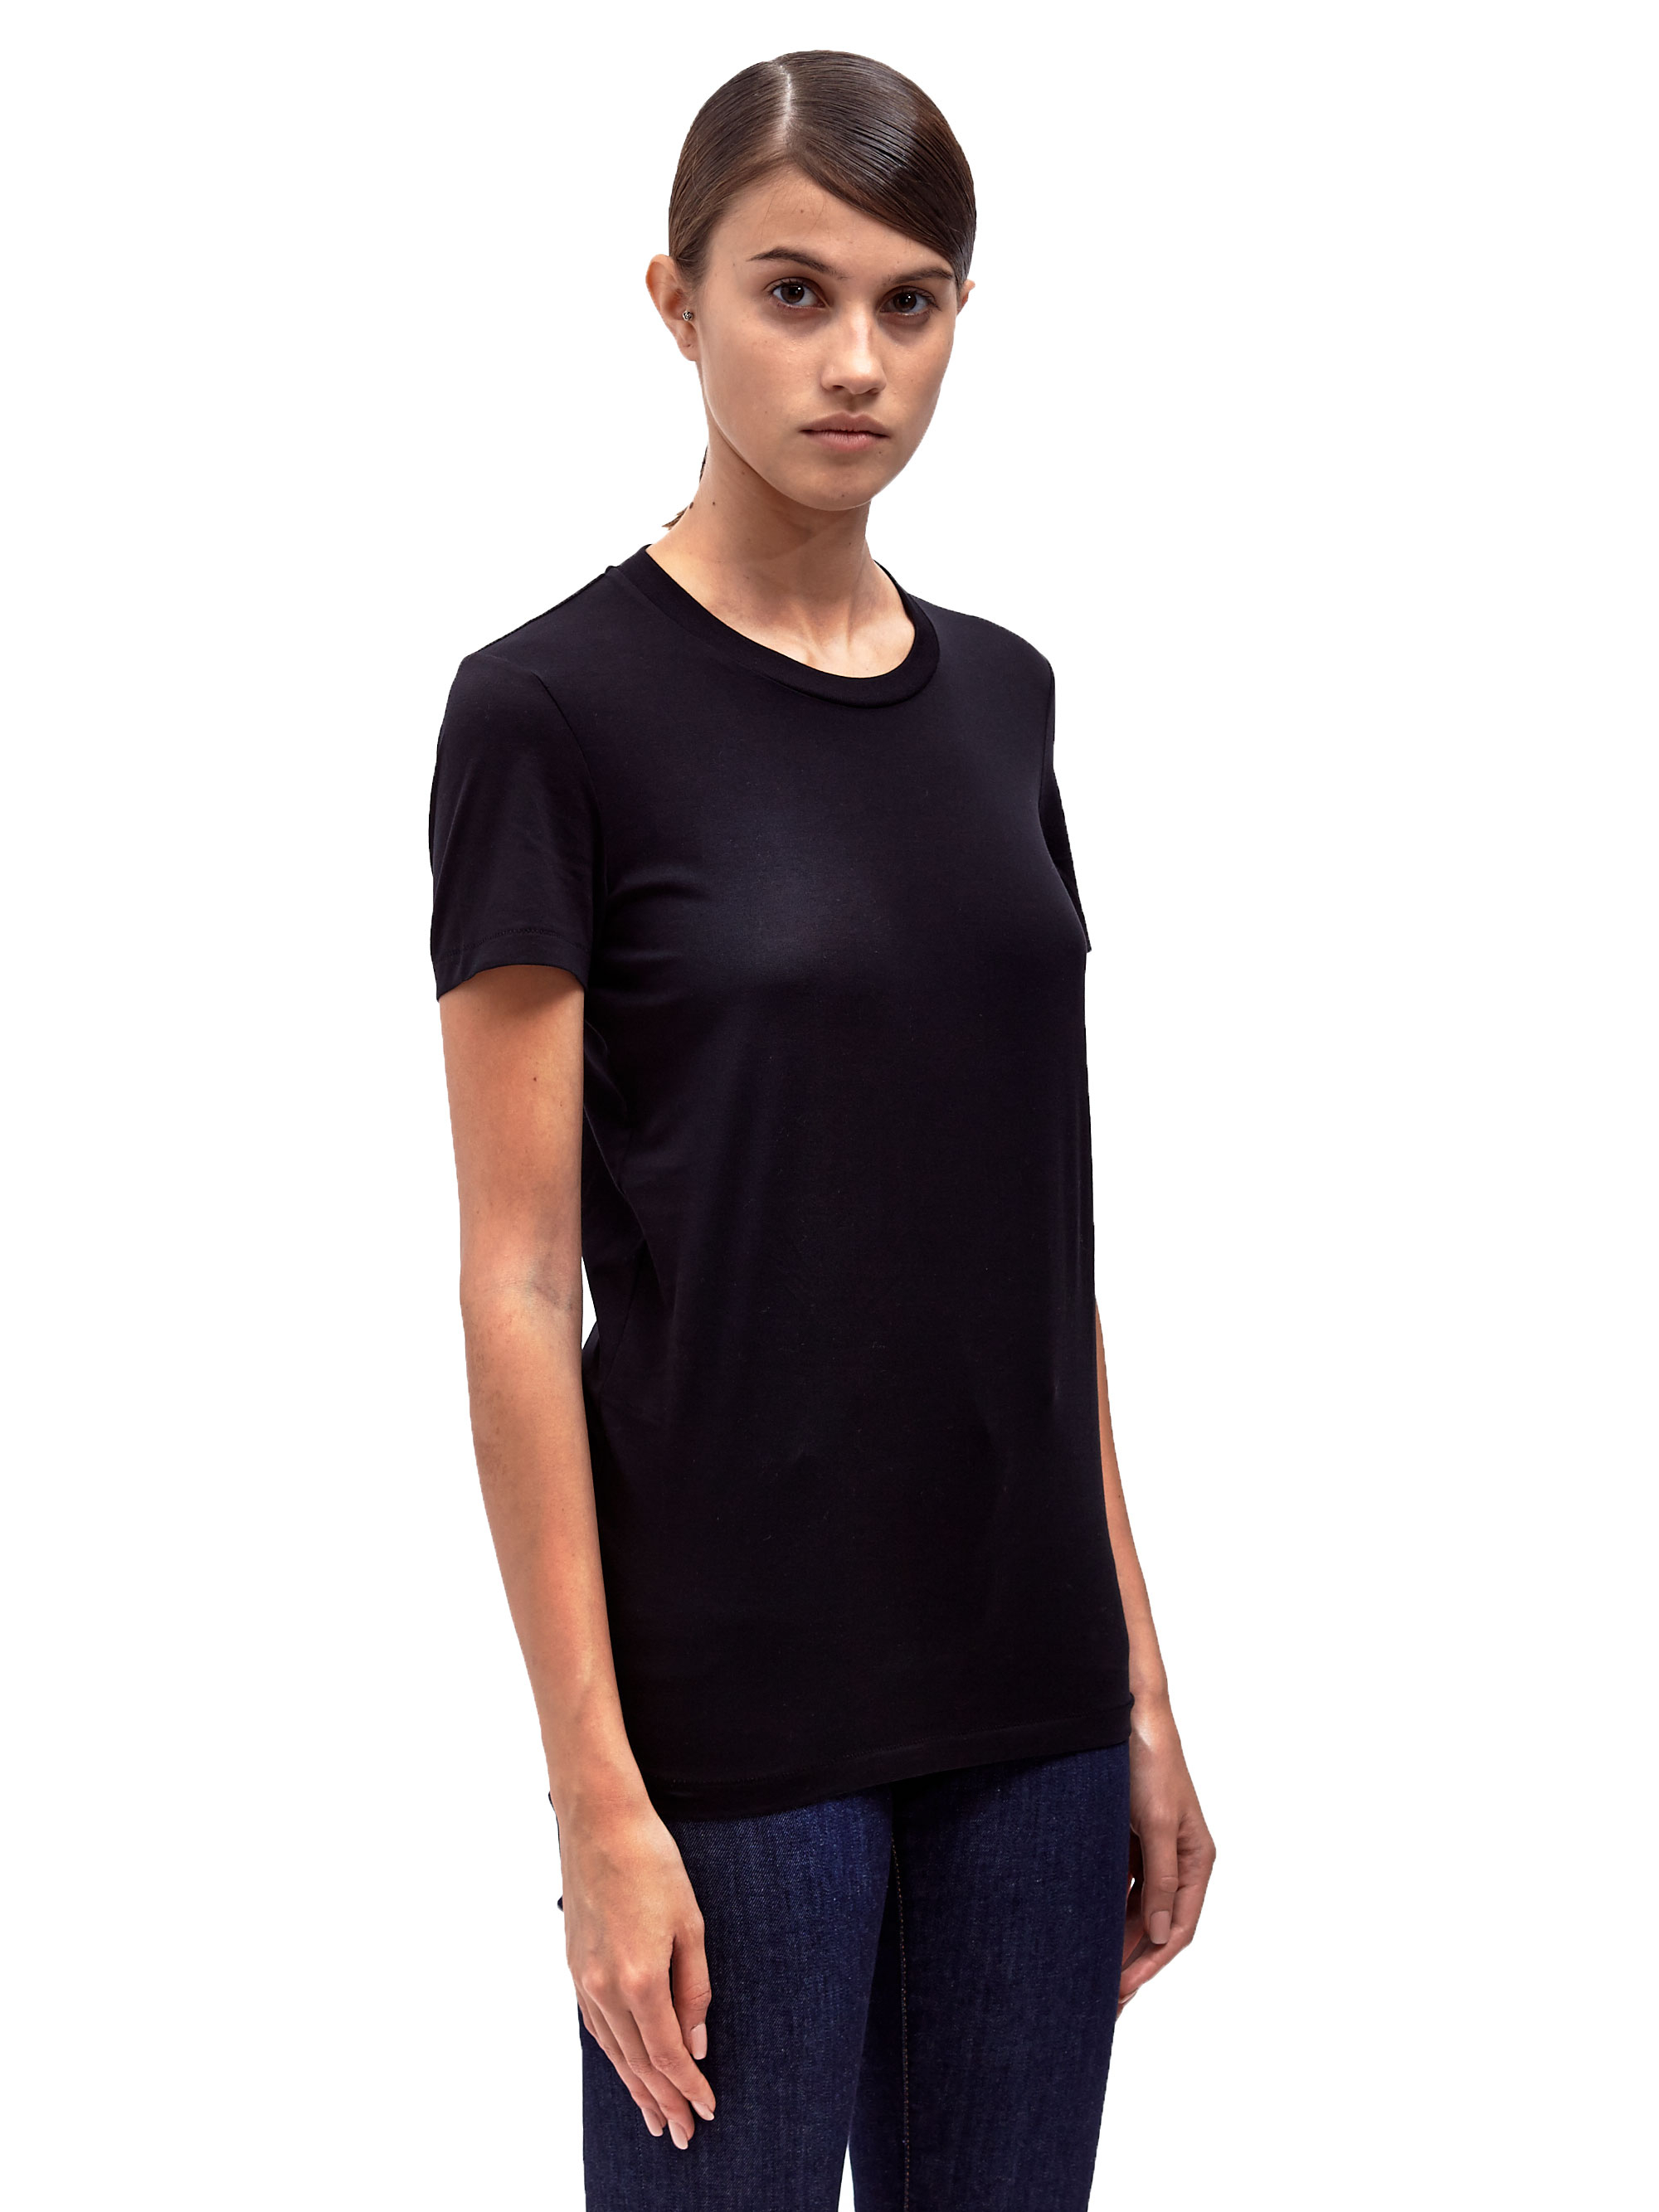 Acne Studios Womens  Bliss Classic Crew  Neck  T  Shirt  in 